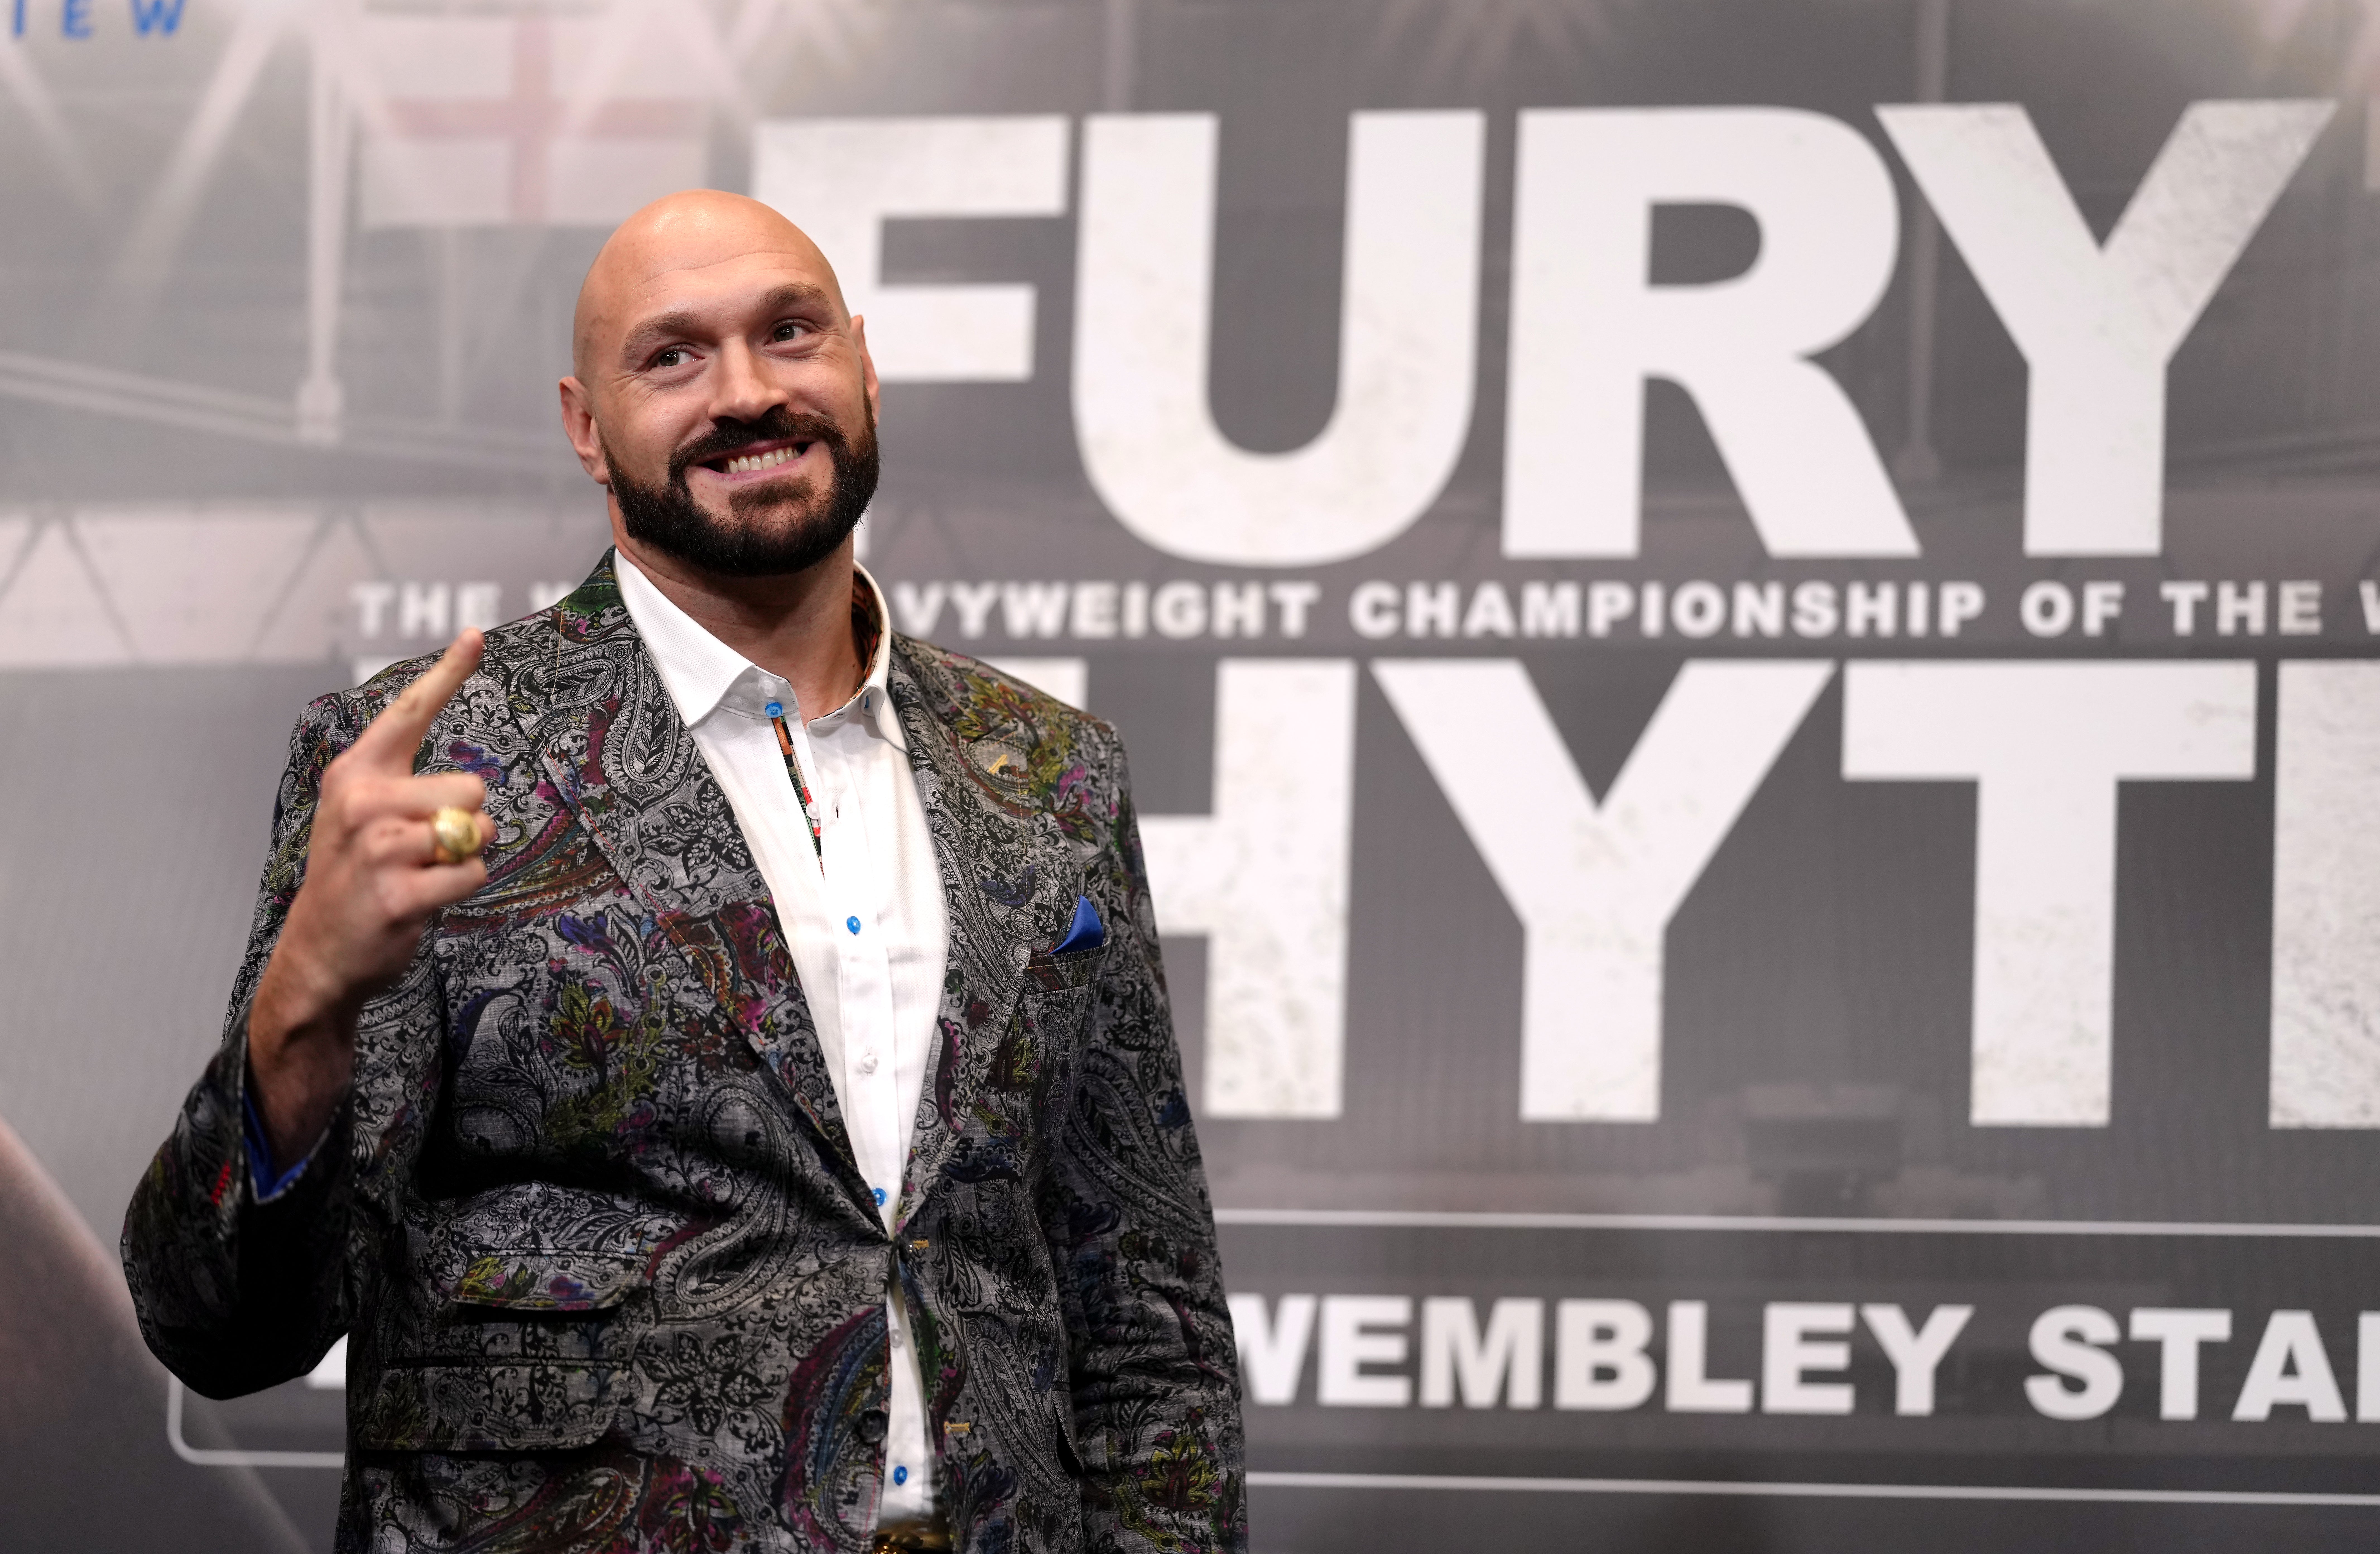 Tyson Fury was not going to let absent ‘friends’ take the shine off his latest moment in the spotlight (John Walton/PA)